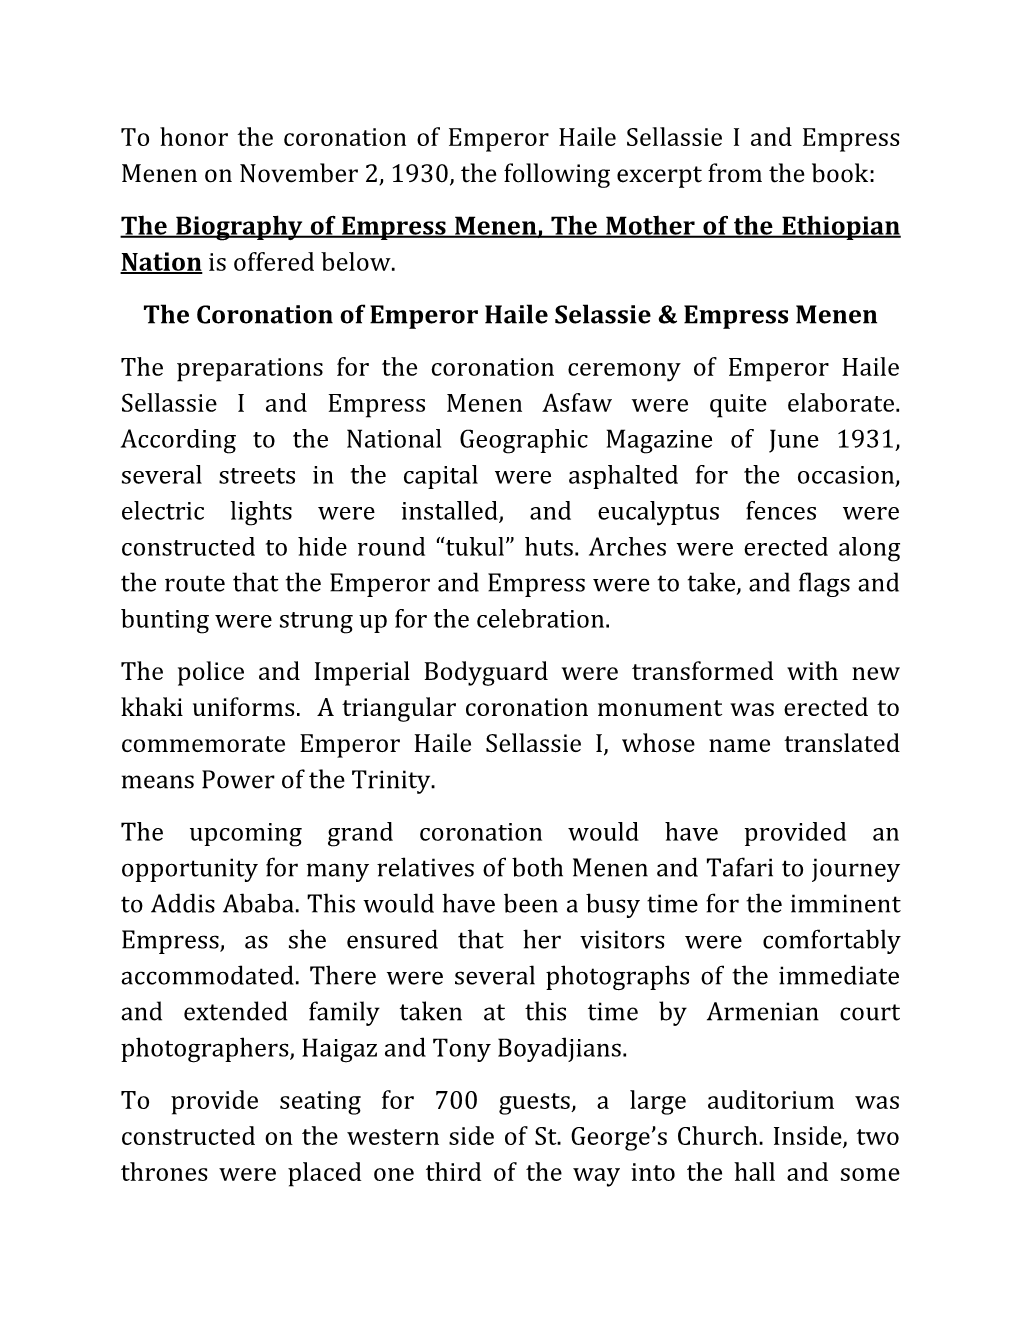 To Honor the Coronation of Emperor Haile Sellassie I and Empress Menen on November 2, 1930, the Following Excerpt from the Book